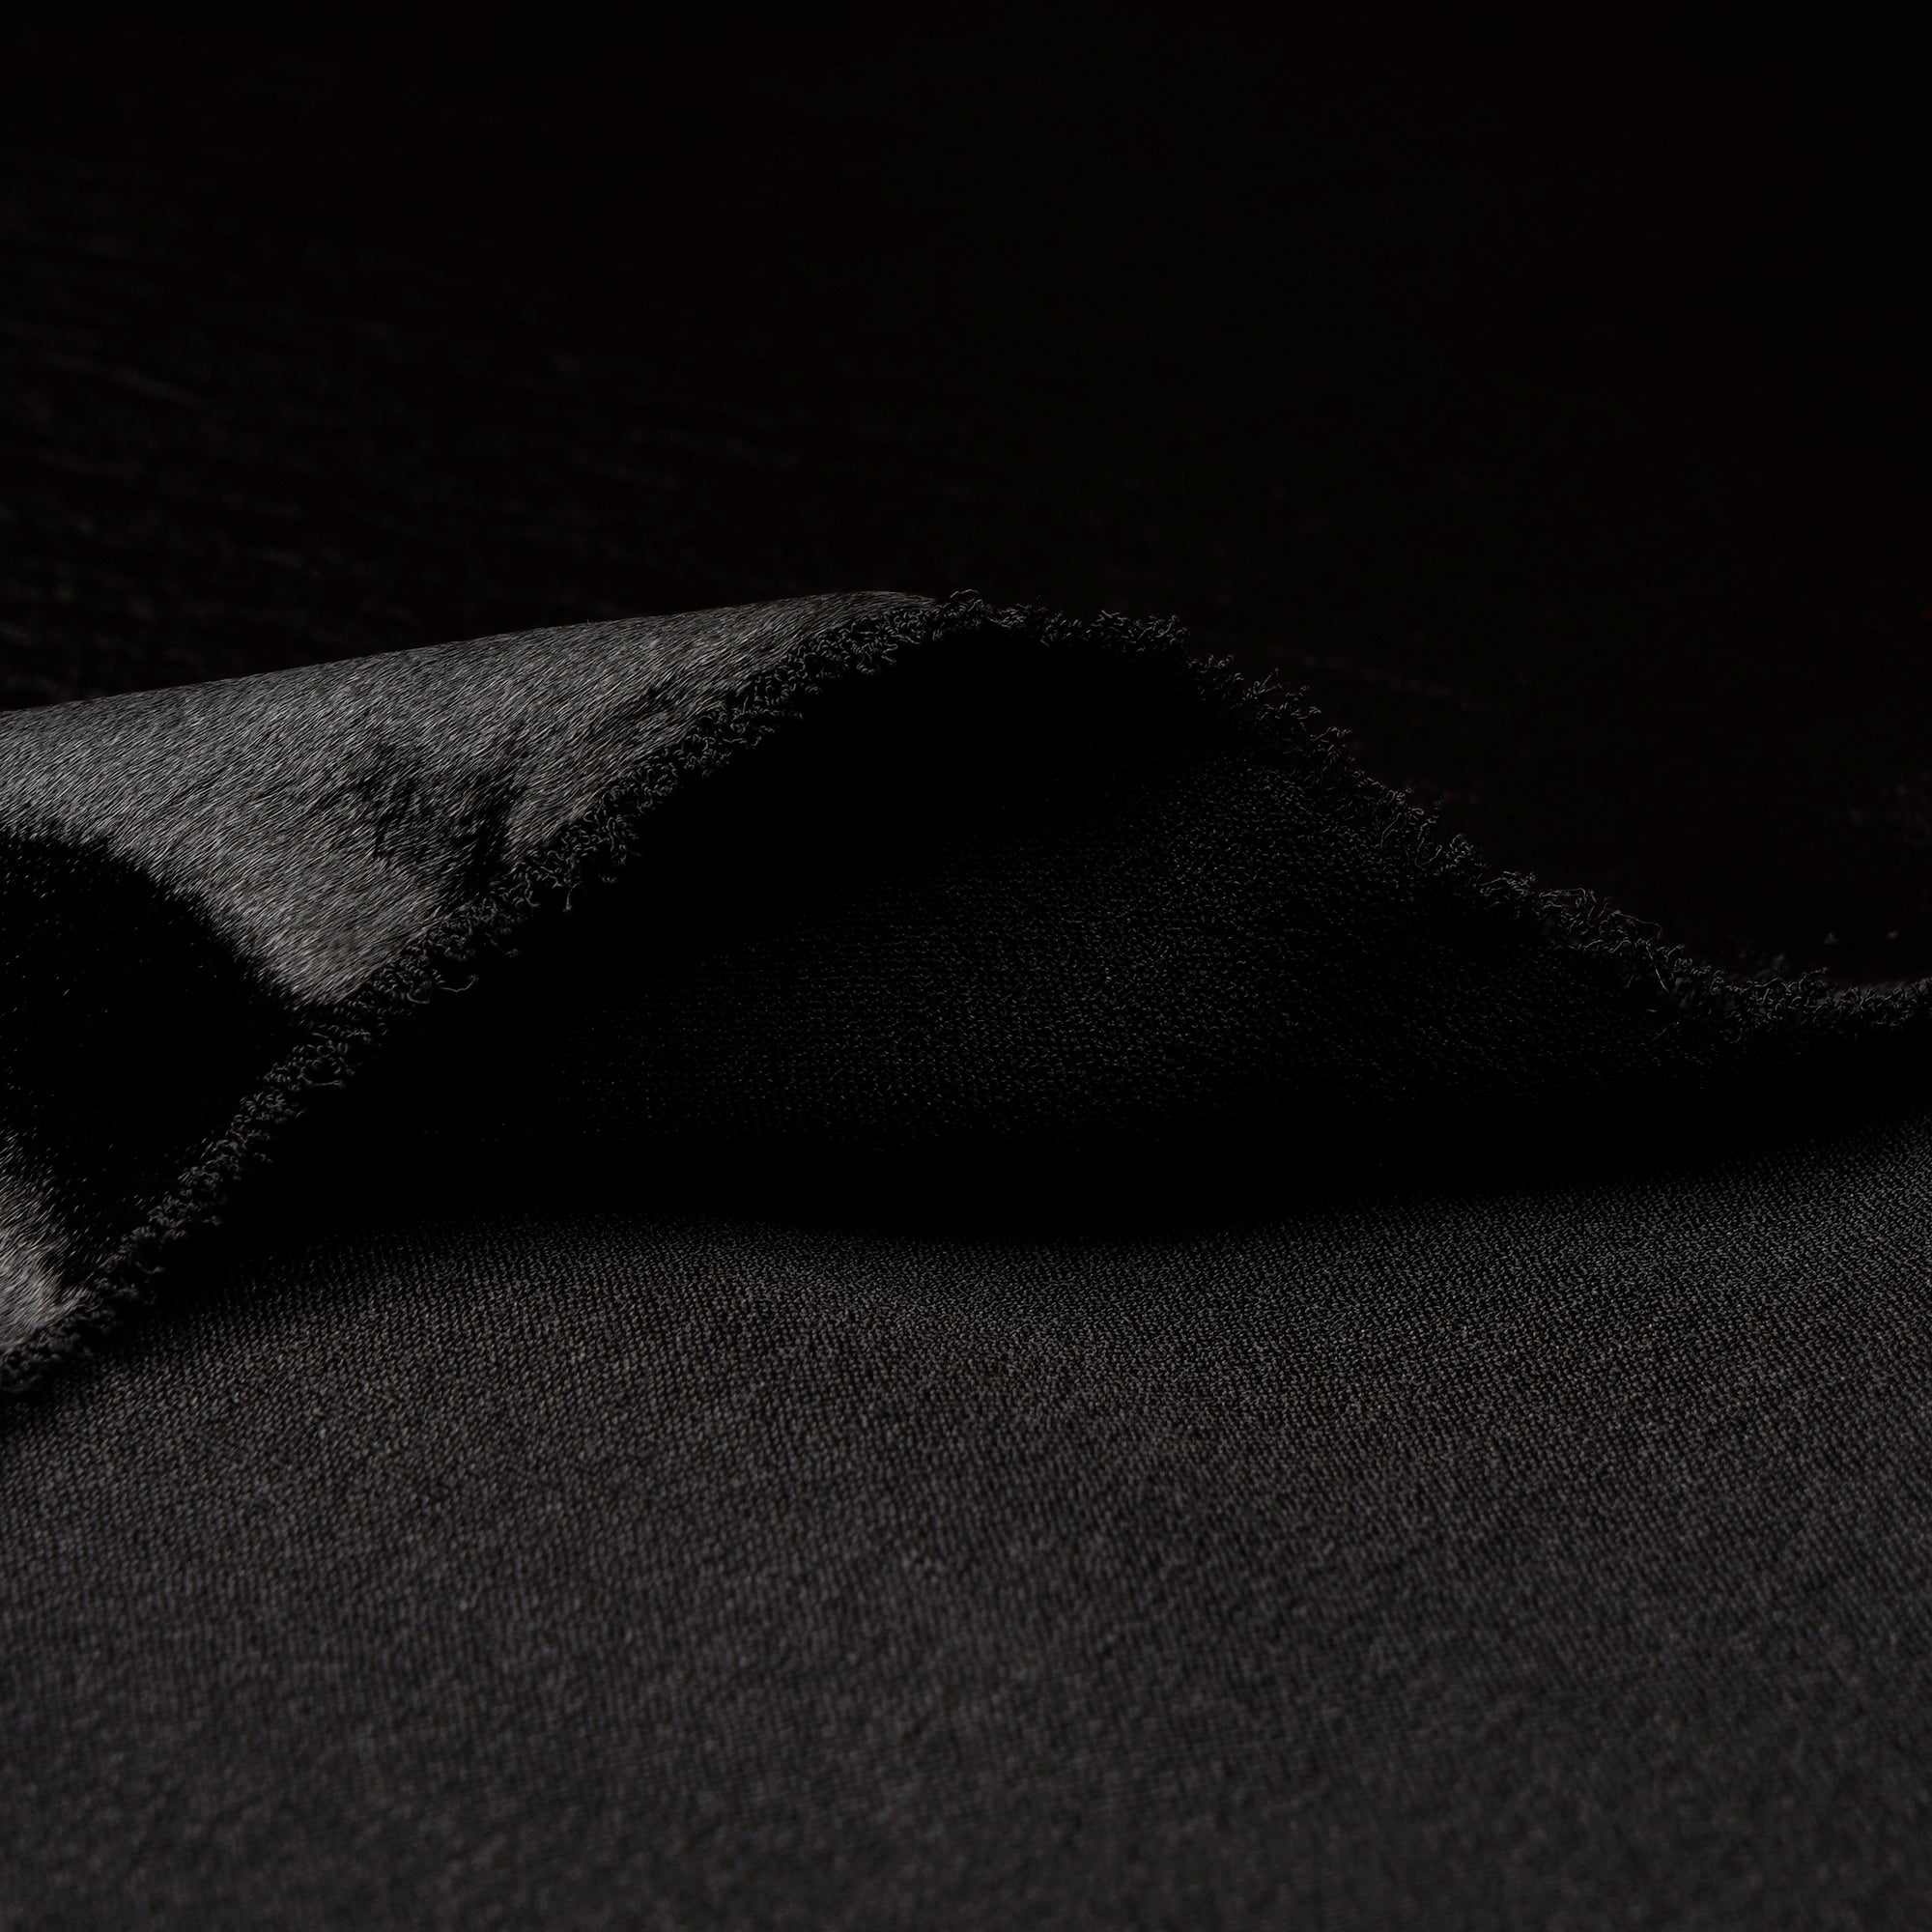 Black Solid Dyed Imported Lido Satin Fabric (60" Width)